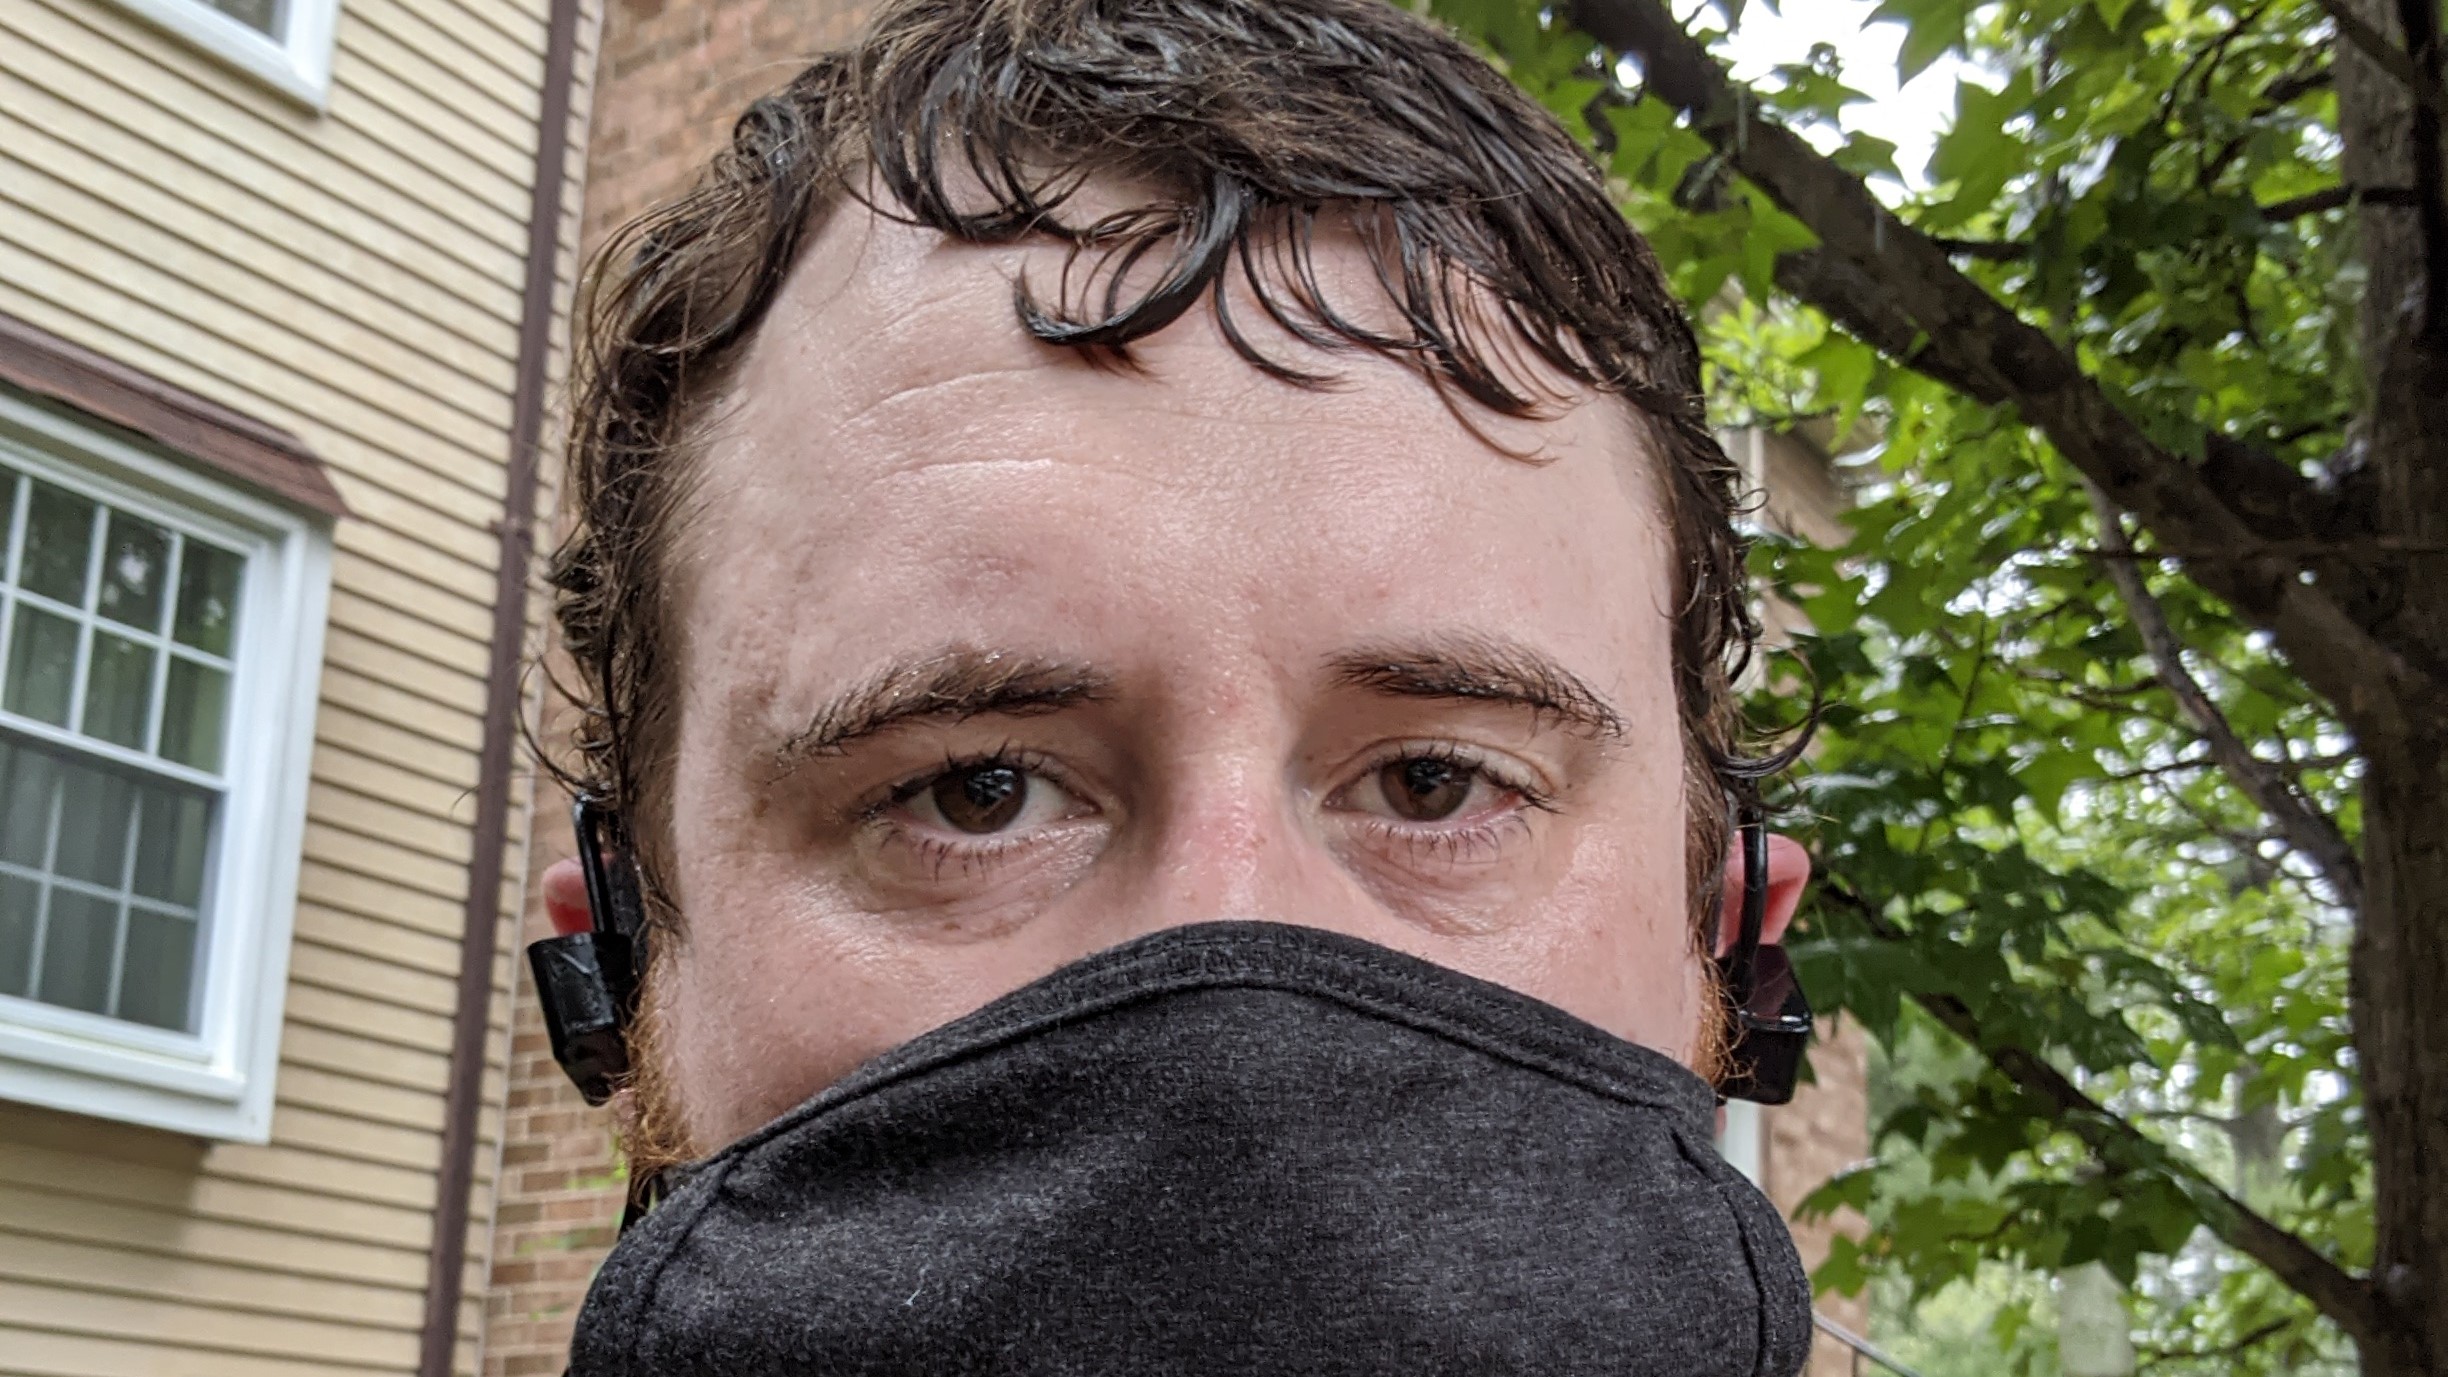 My face, masked, wet and tired